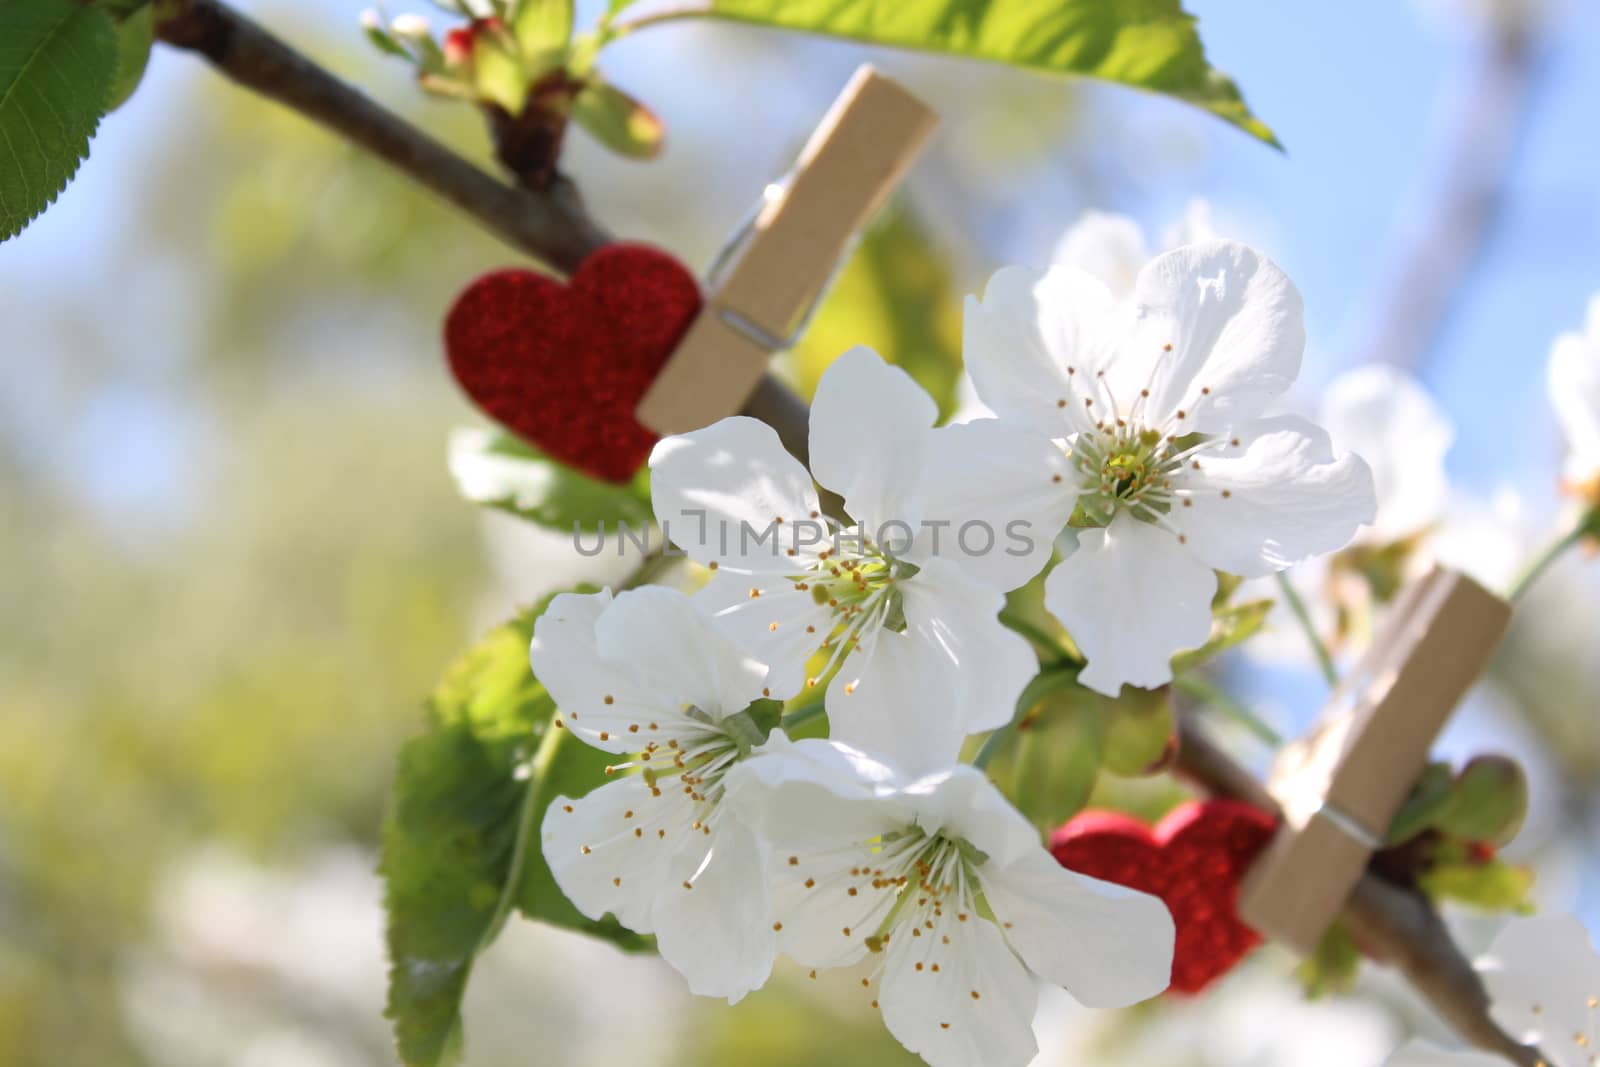 The picture shows red hearts in the blossoming cherry tree.